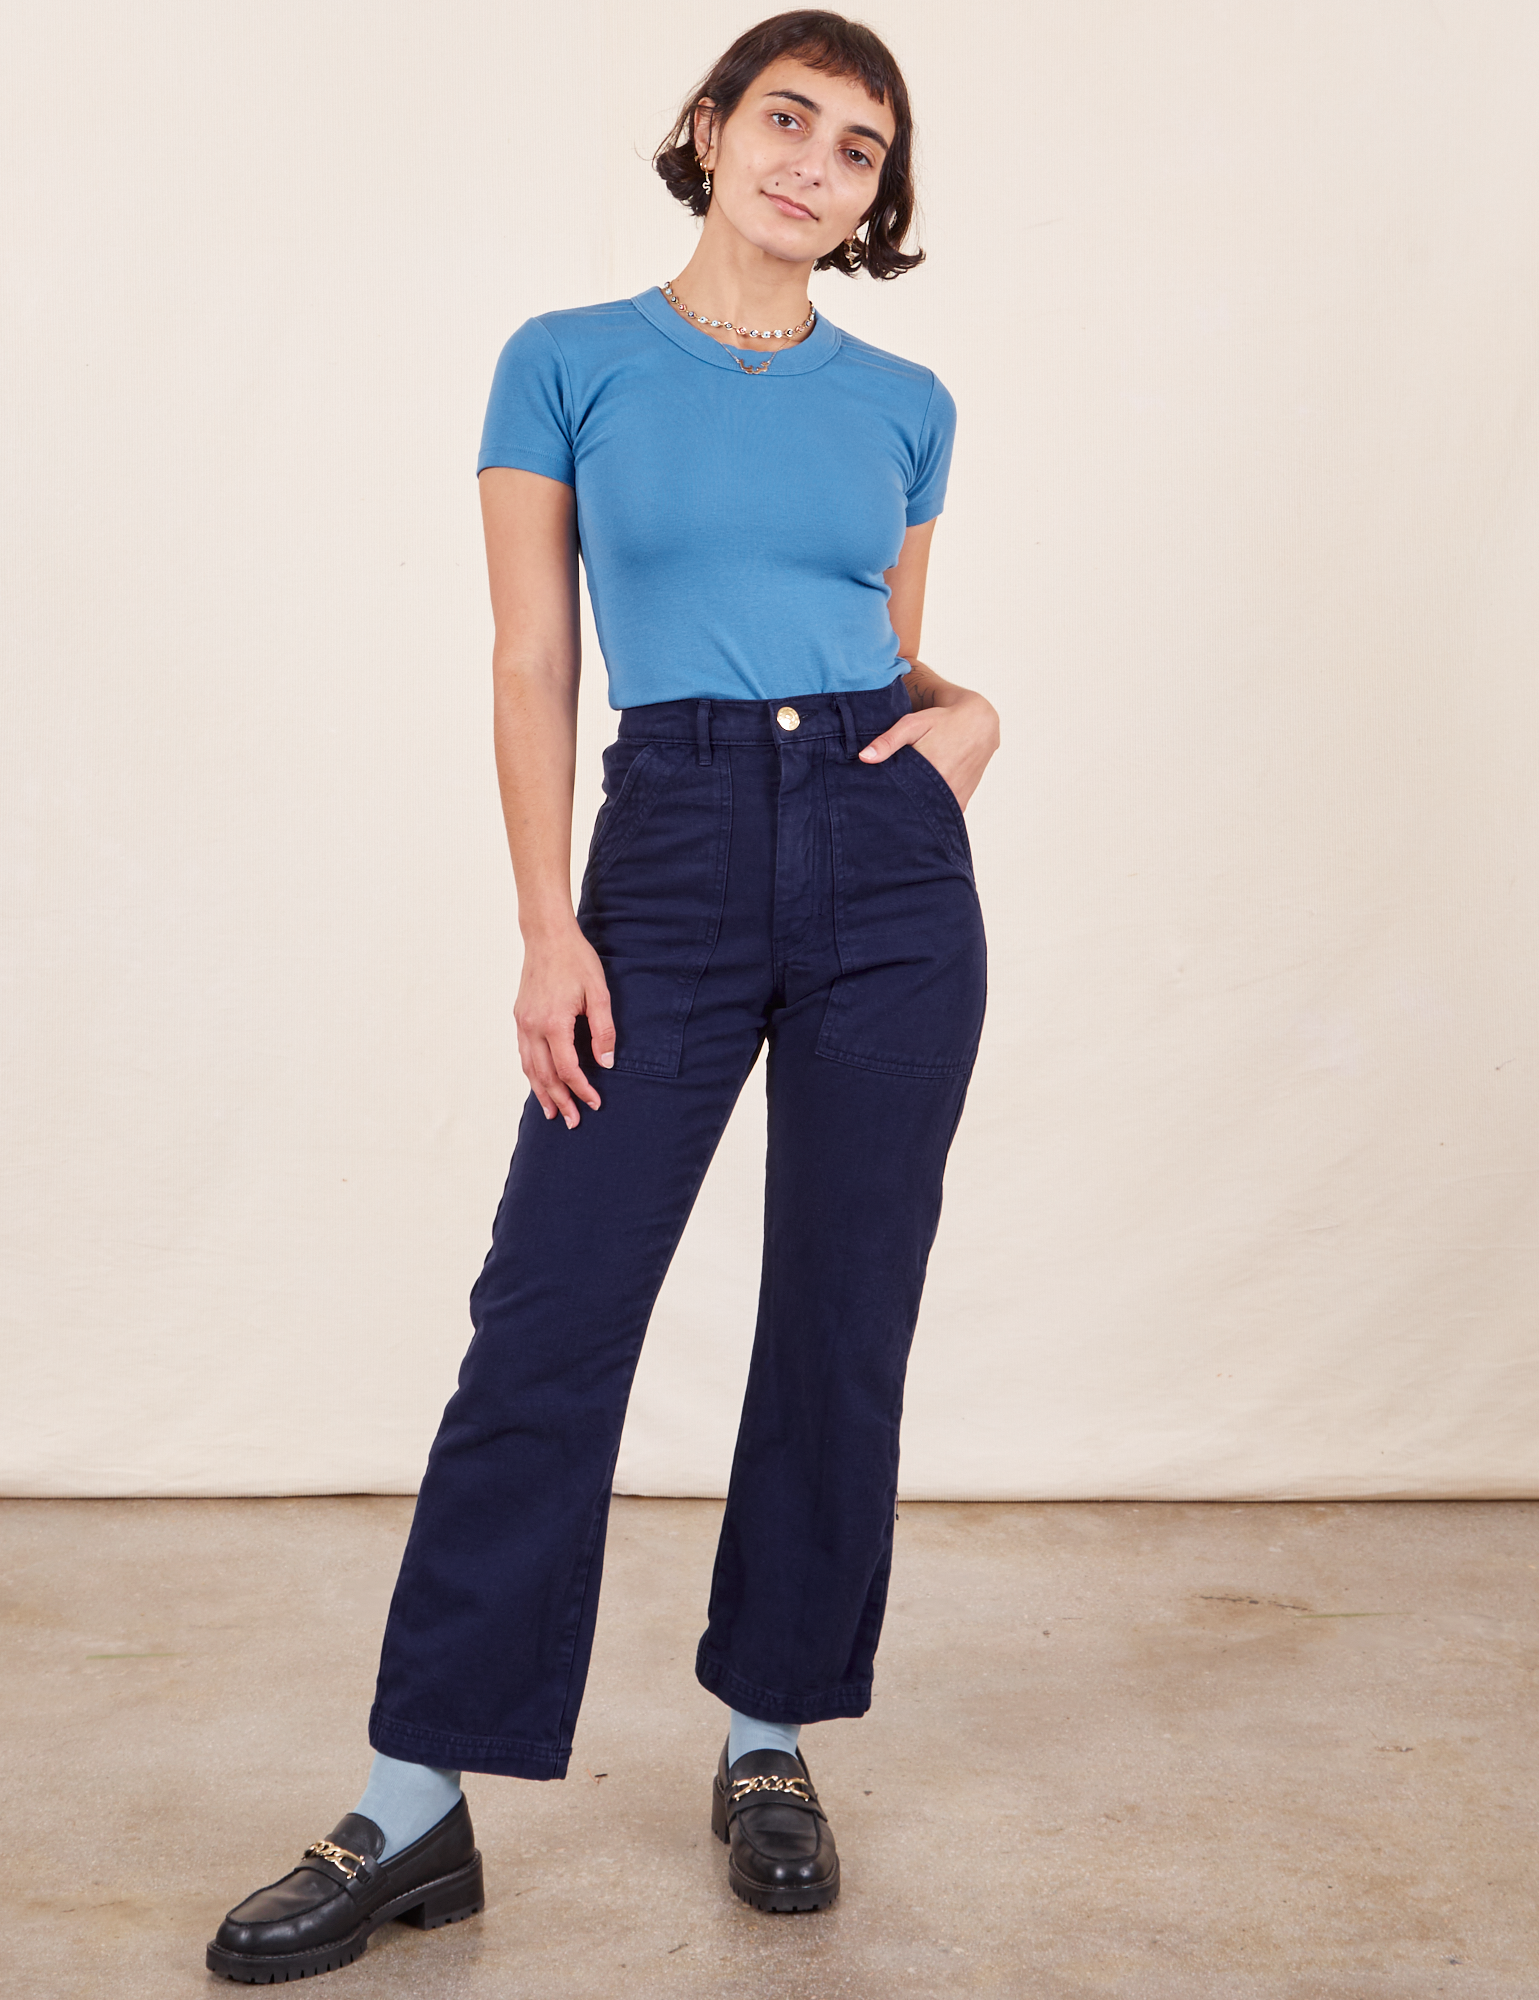 Soraya is 5&#39;2&quot; and wearing Petite XXS Work Pants in Navy Blue paired with Greek Blue Baby Tee